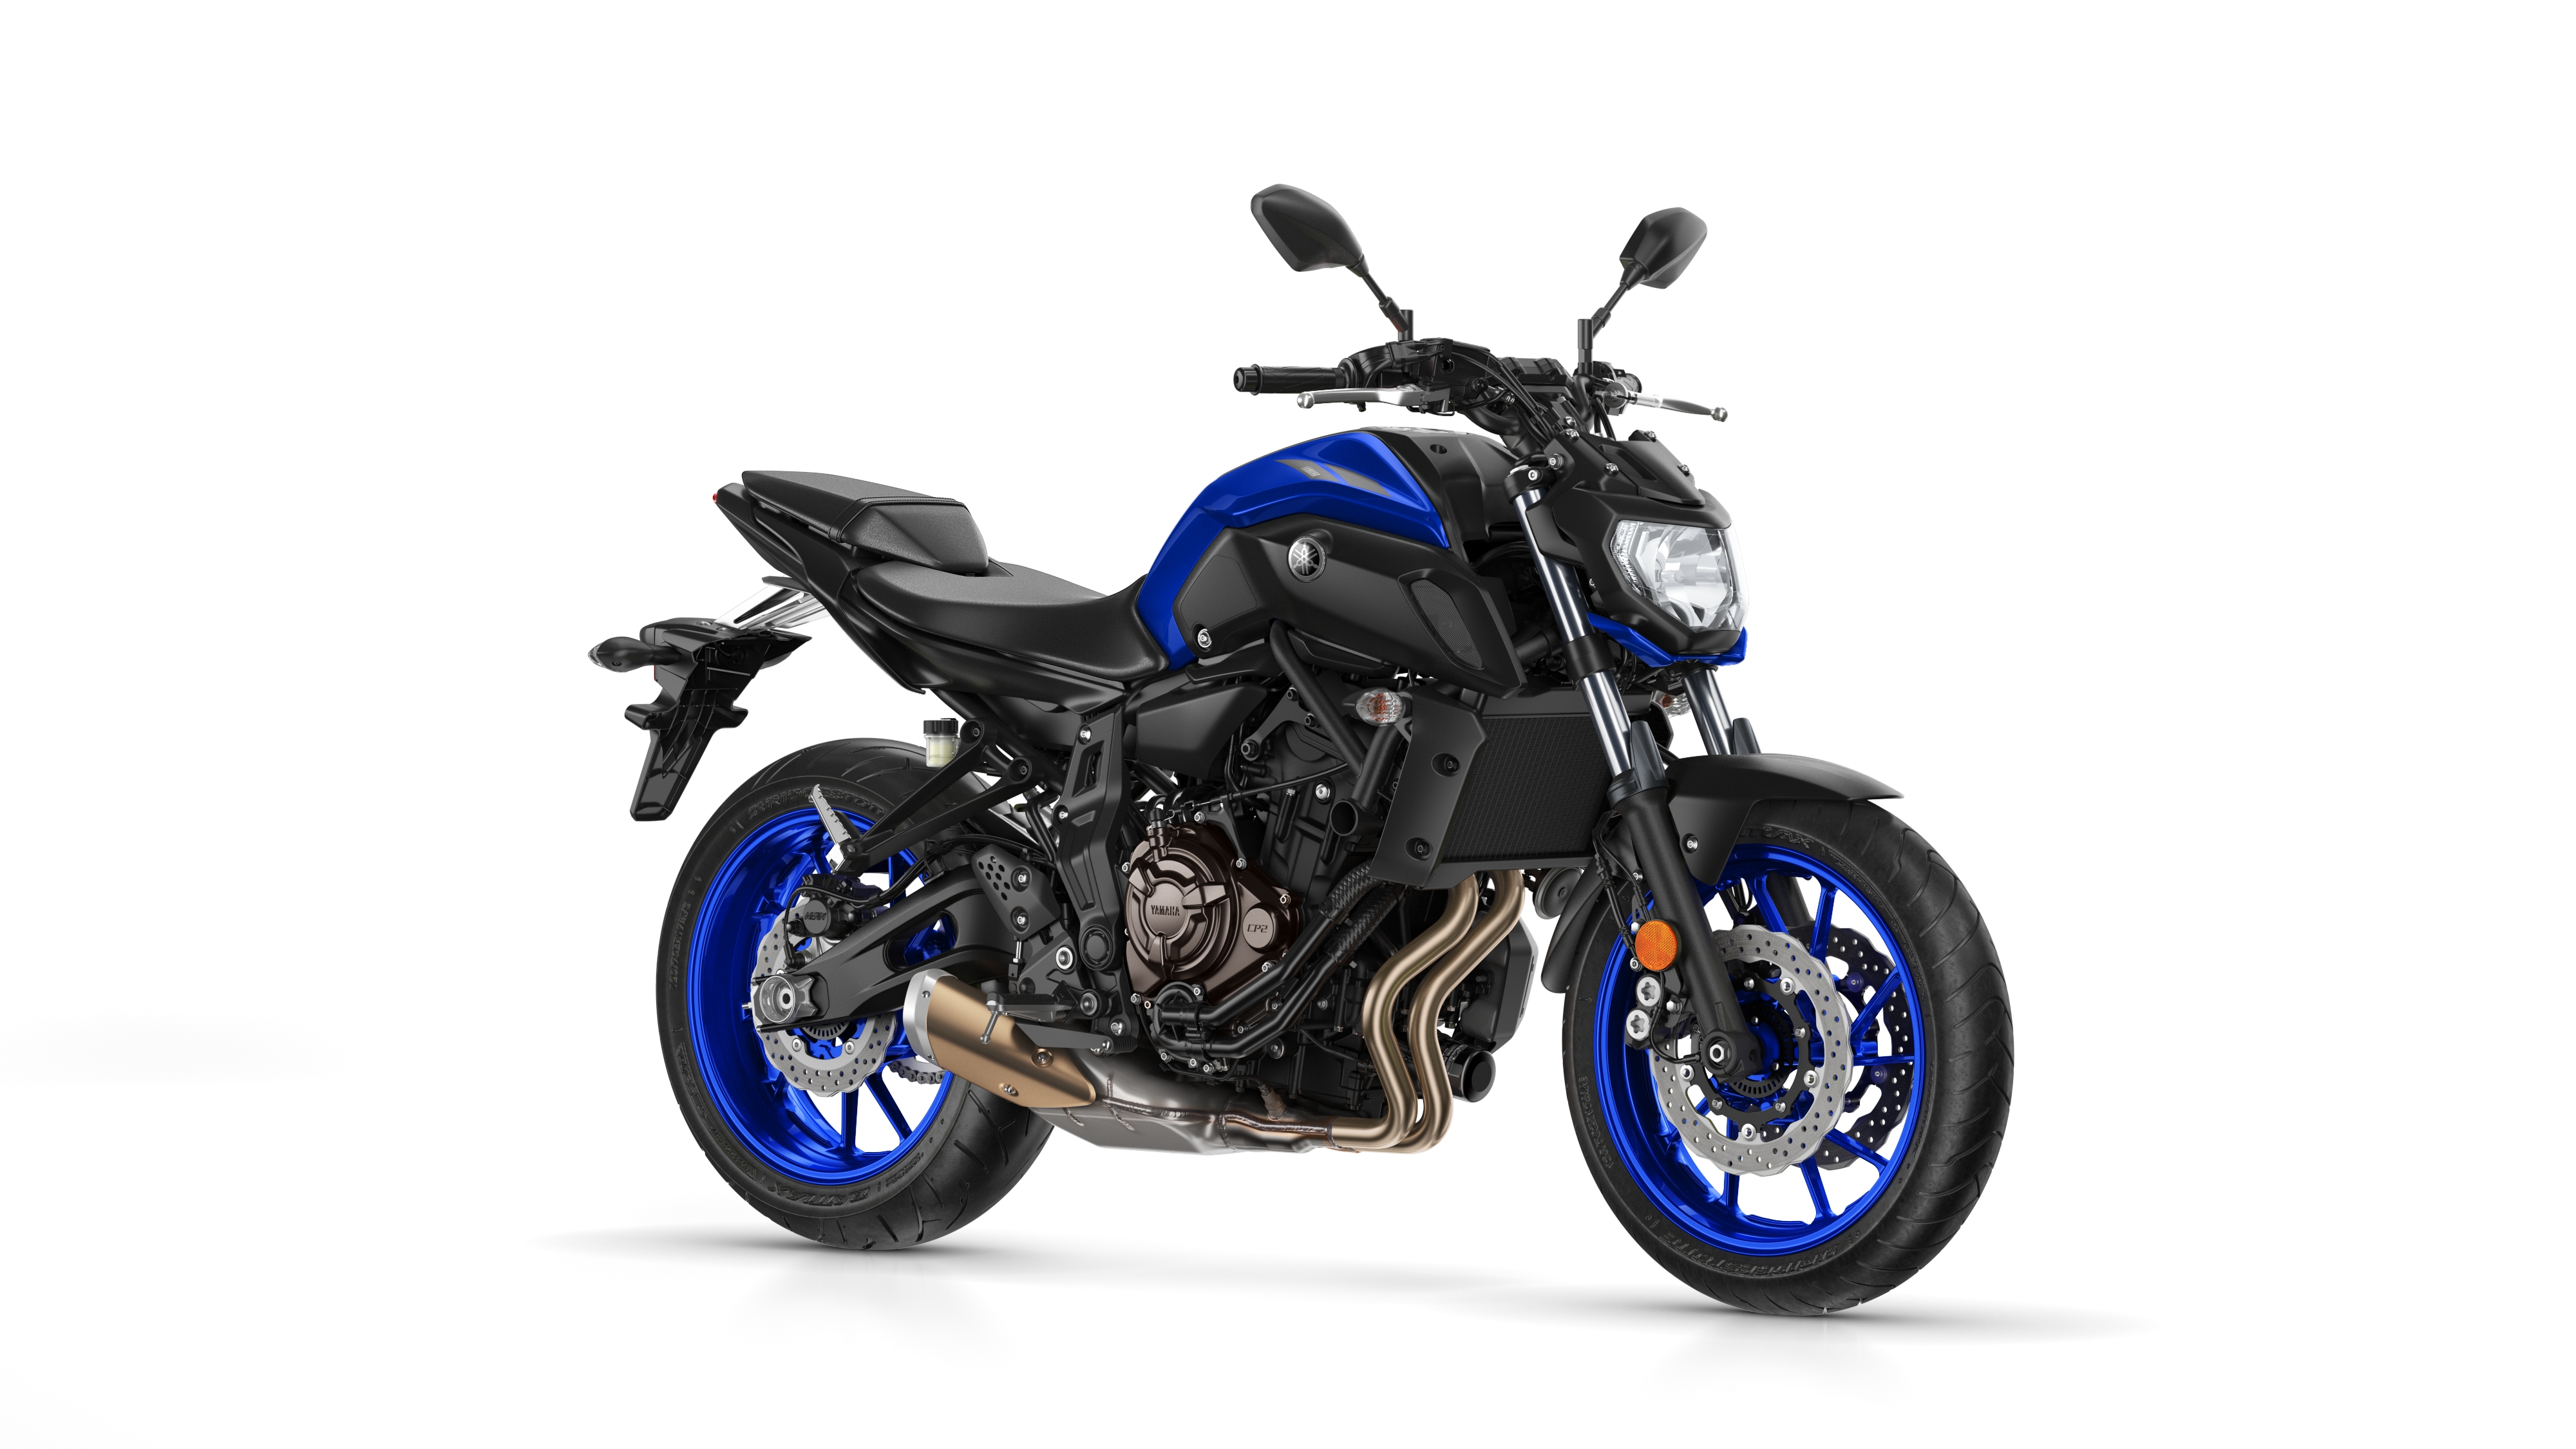 Anticuado Canal sutil Yamaha MT-07 Dark Attraction Introduced - Motorcycle news, Motorcycle  reviews from Malaysia, Asia and the world - BikesRepublic.com